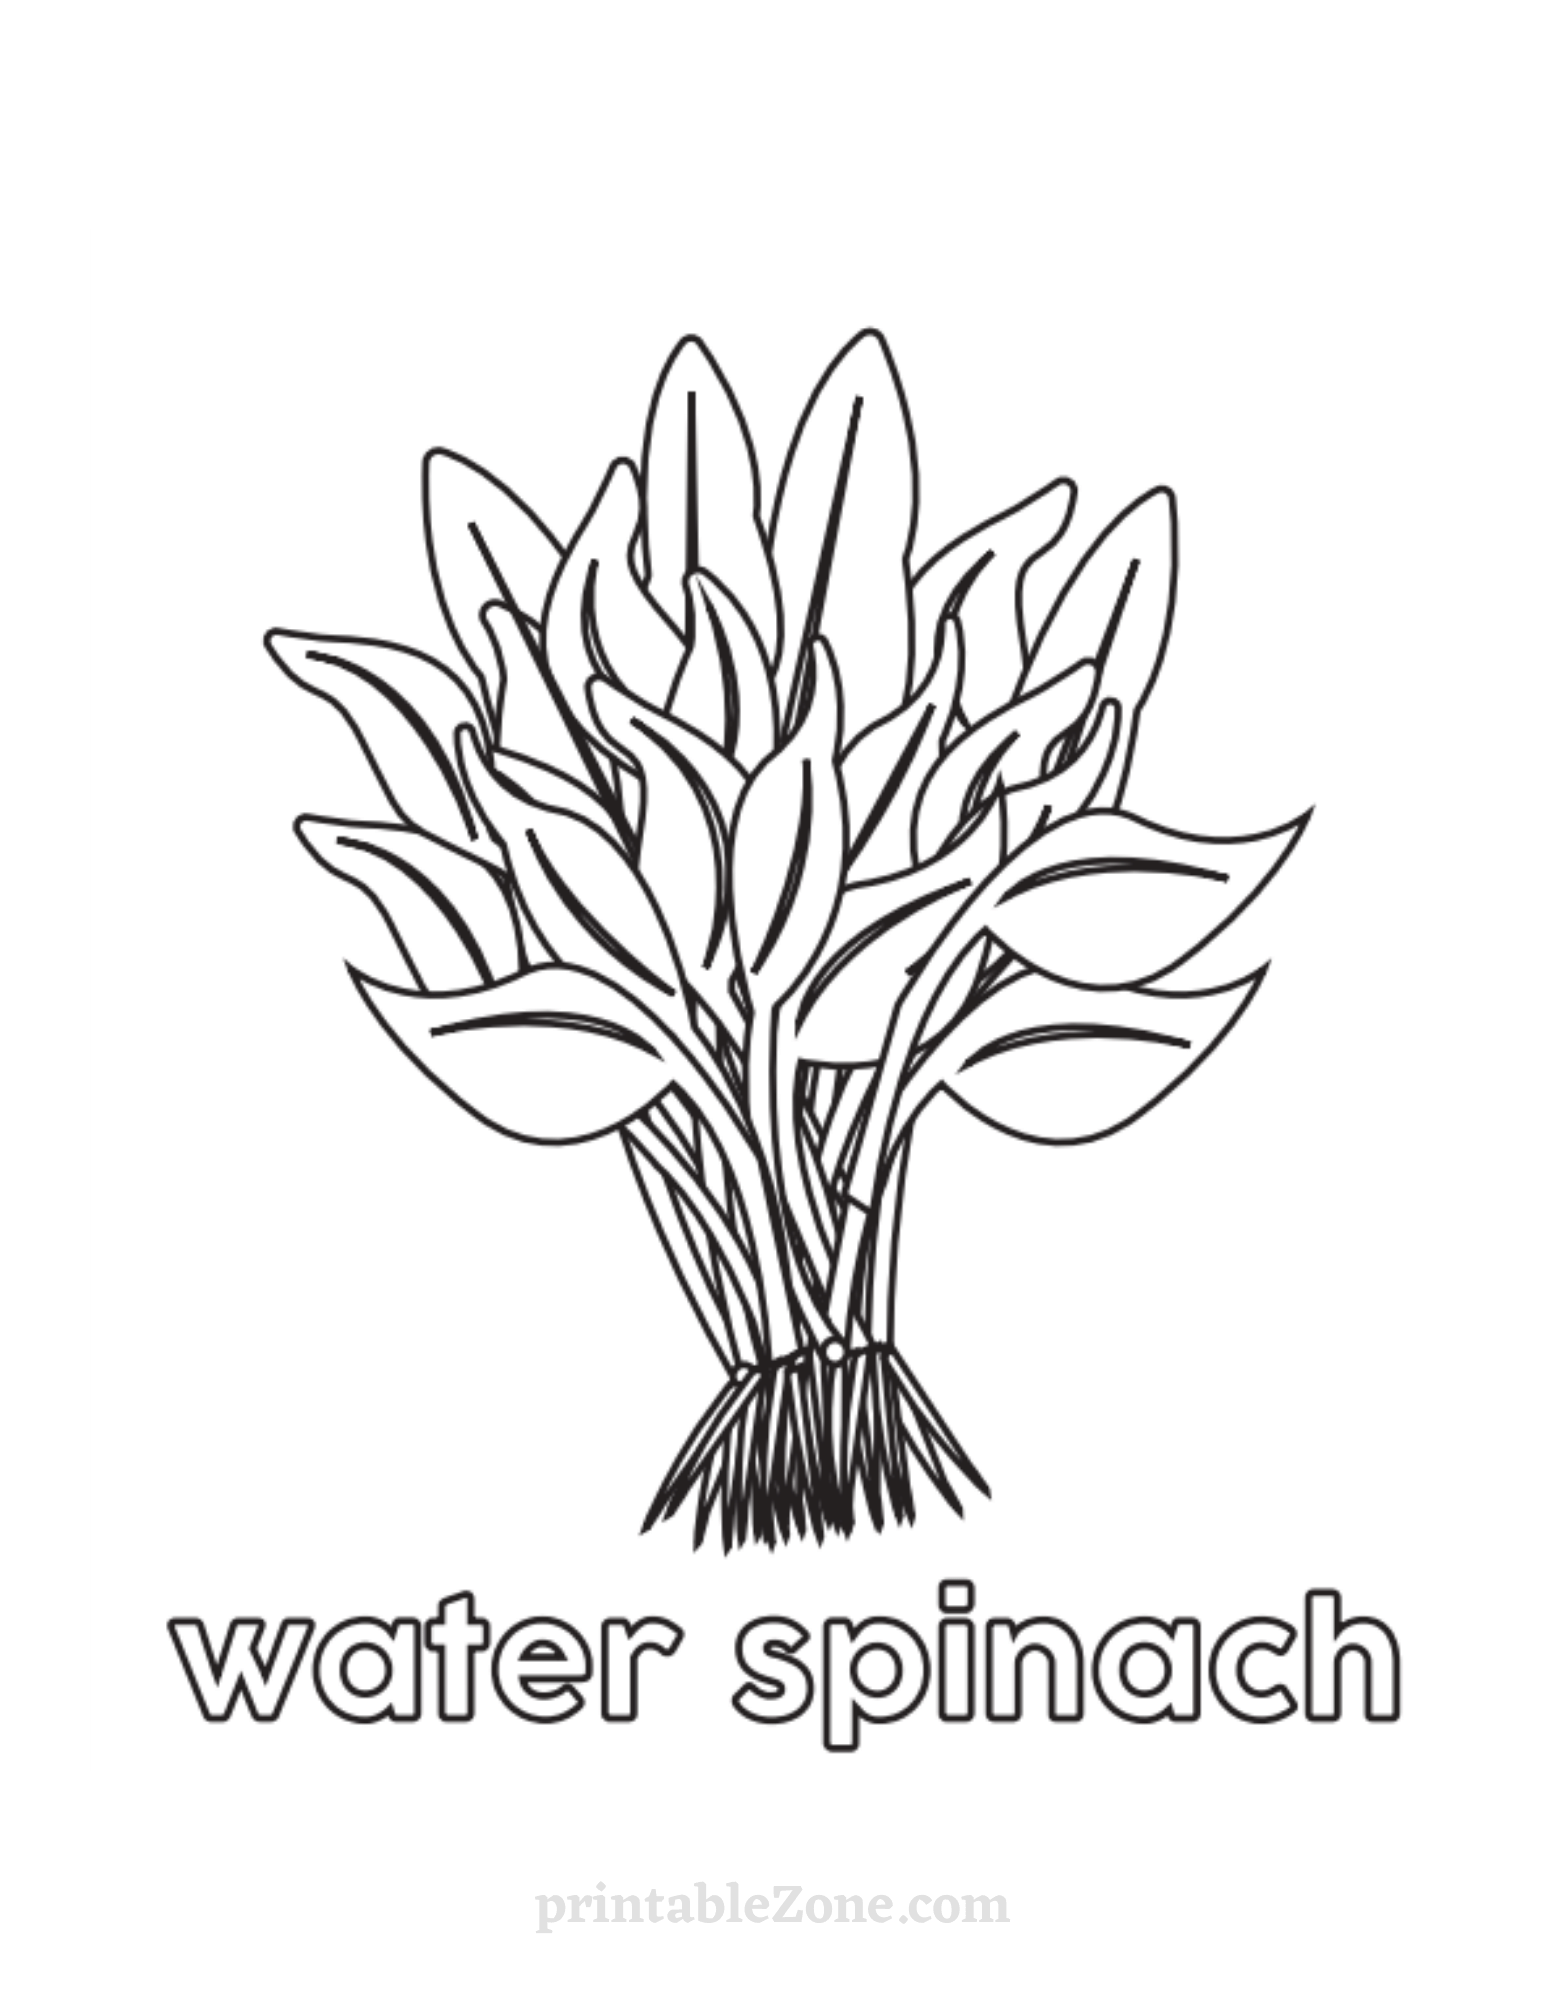 Water Spinach - Vegetable Coloring Page for Kids - Printable Zone